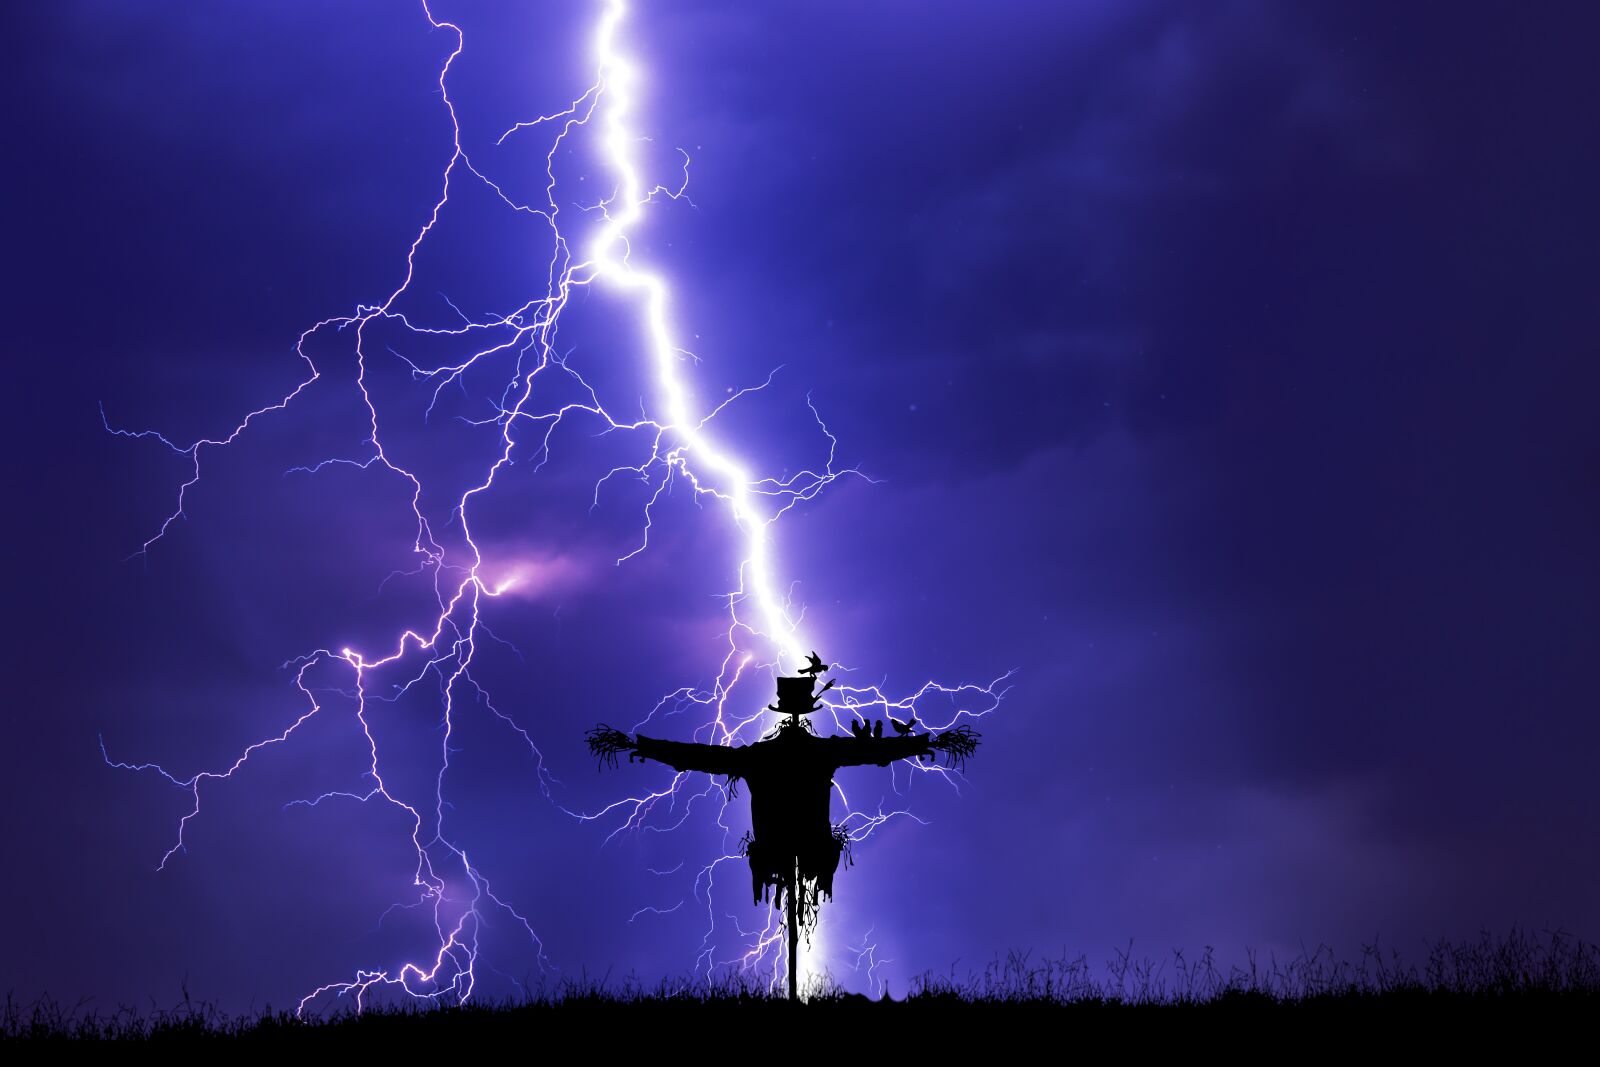 Sony a6300 sample photo. Lightning, scarecrow, silhouette photography